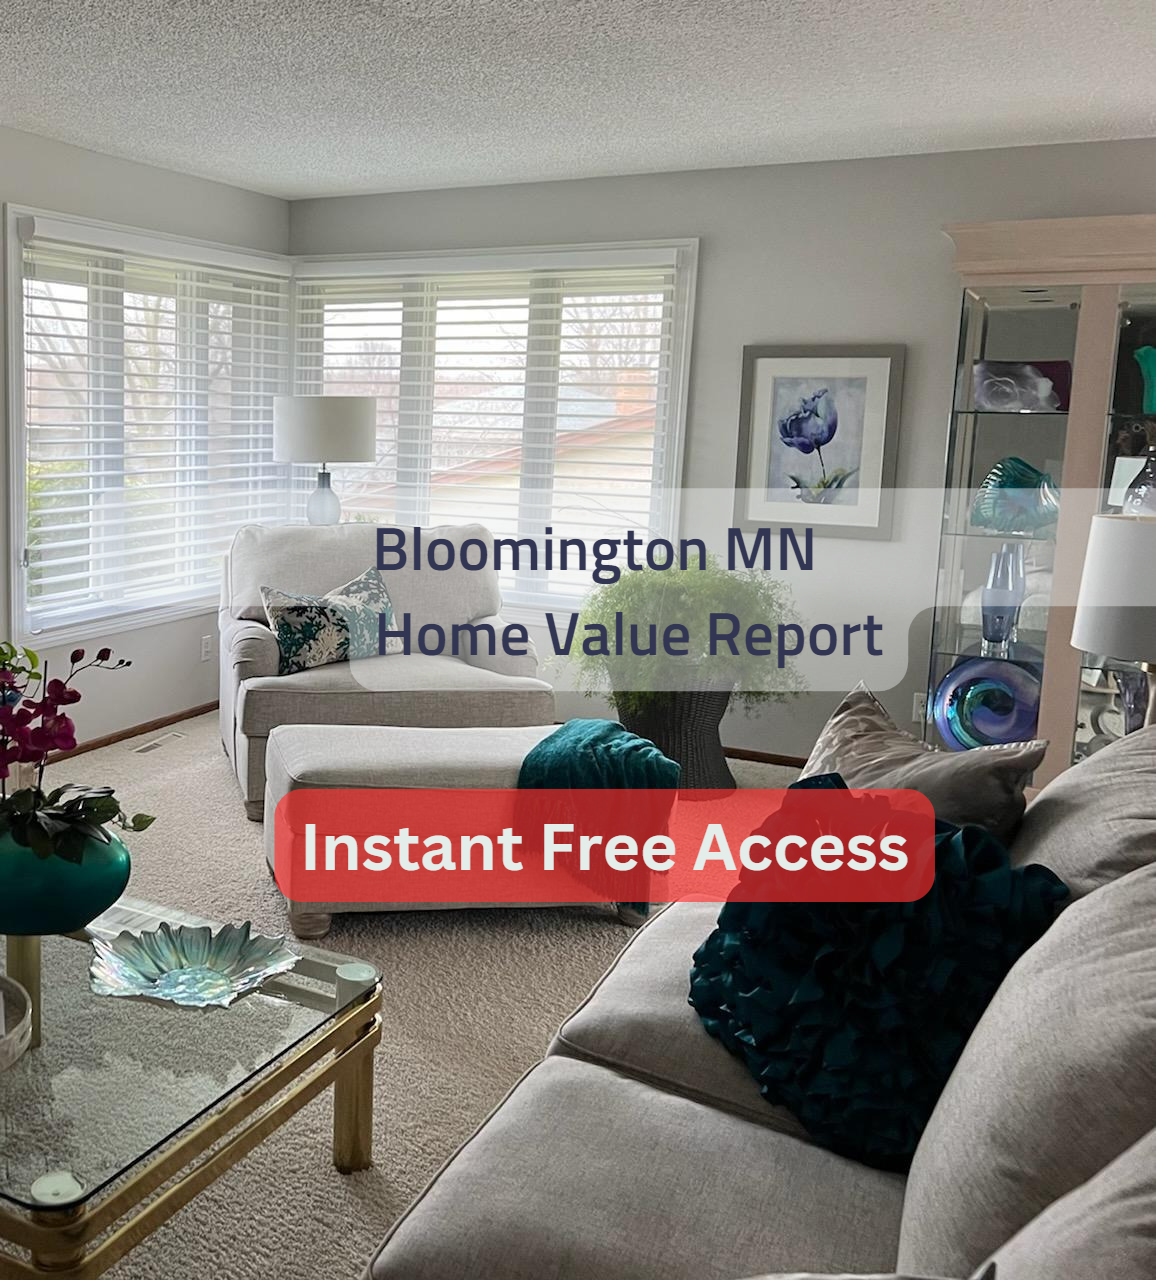 Bloomington_MN_Home_Value_Report2.png